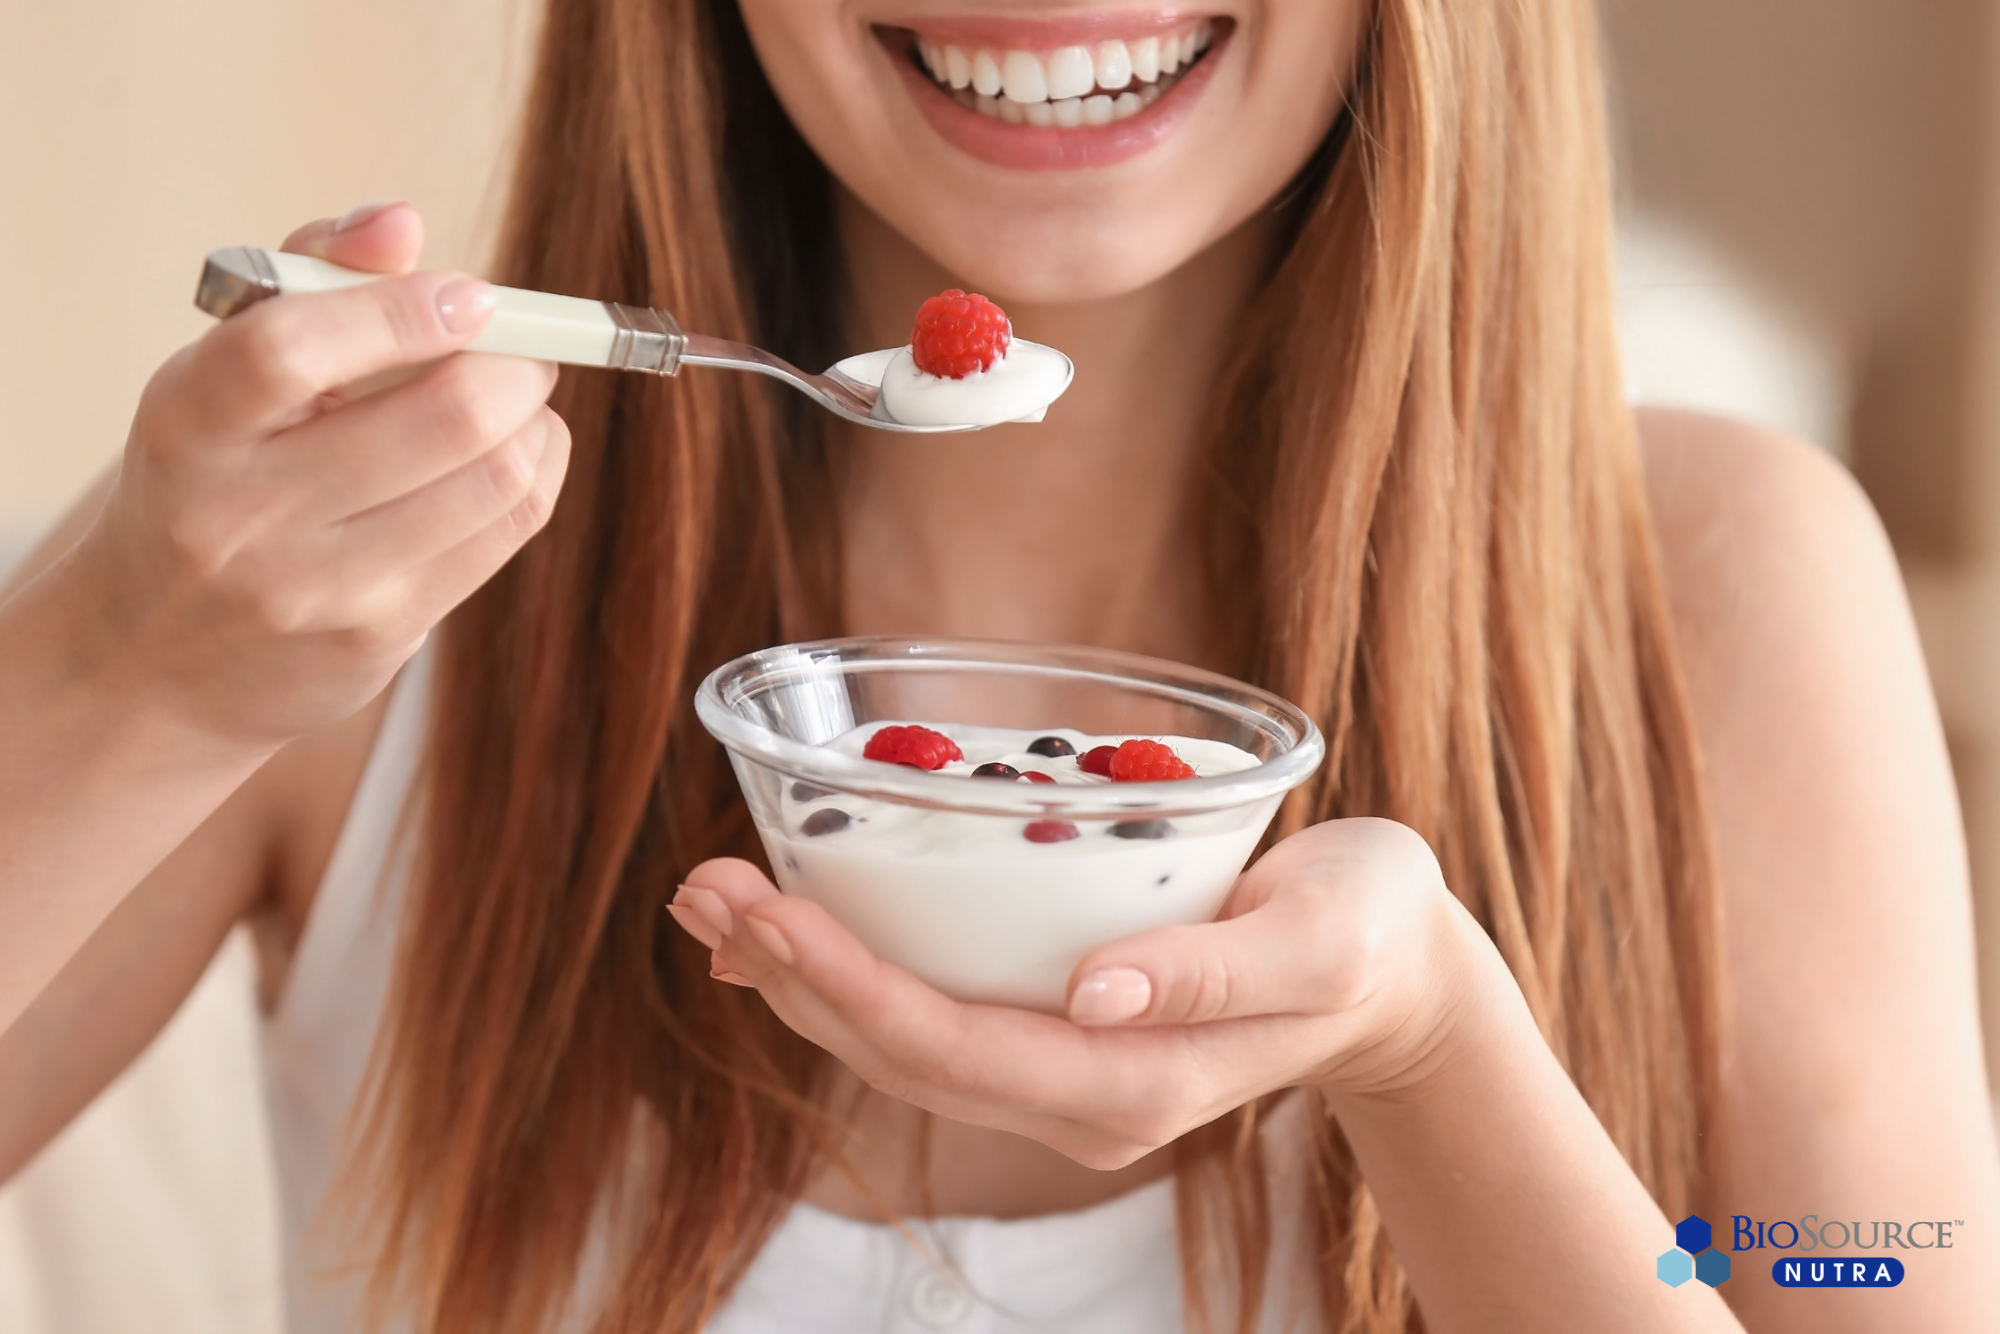 A young woman eats a bowl of yogurt and fruit